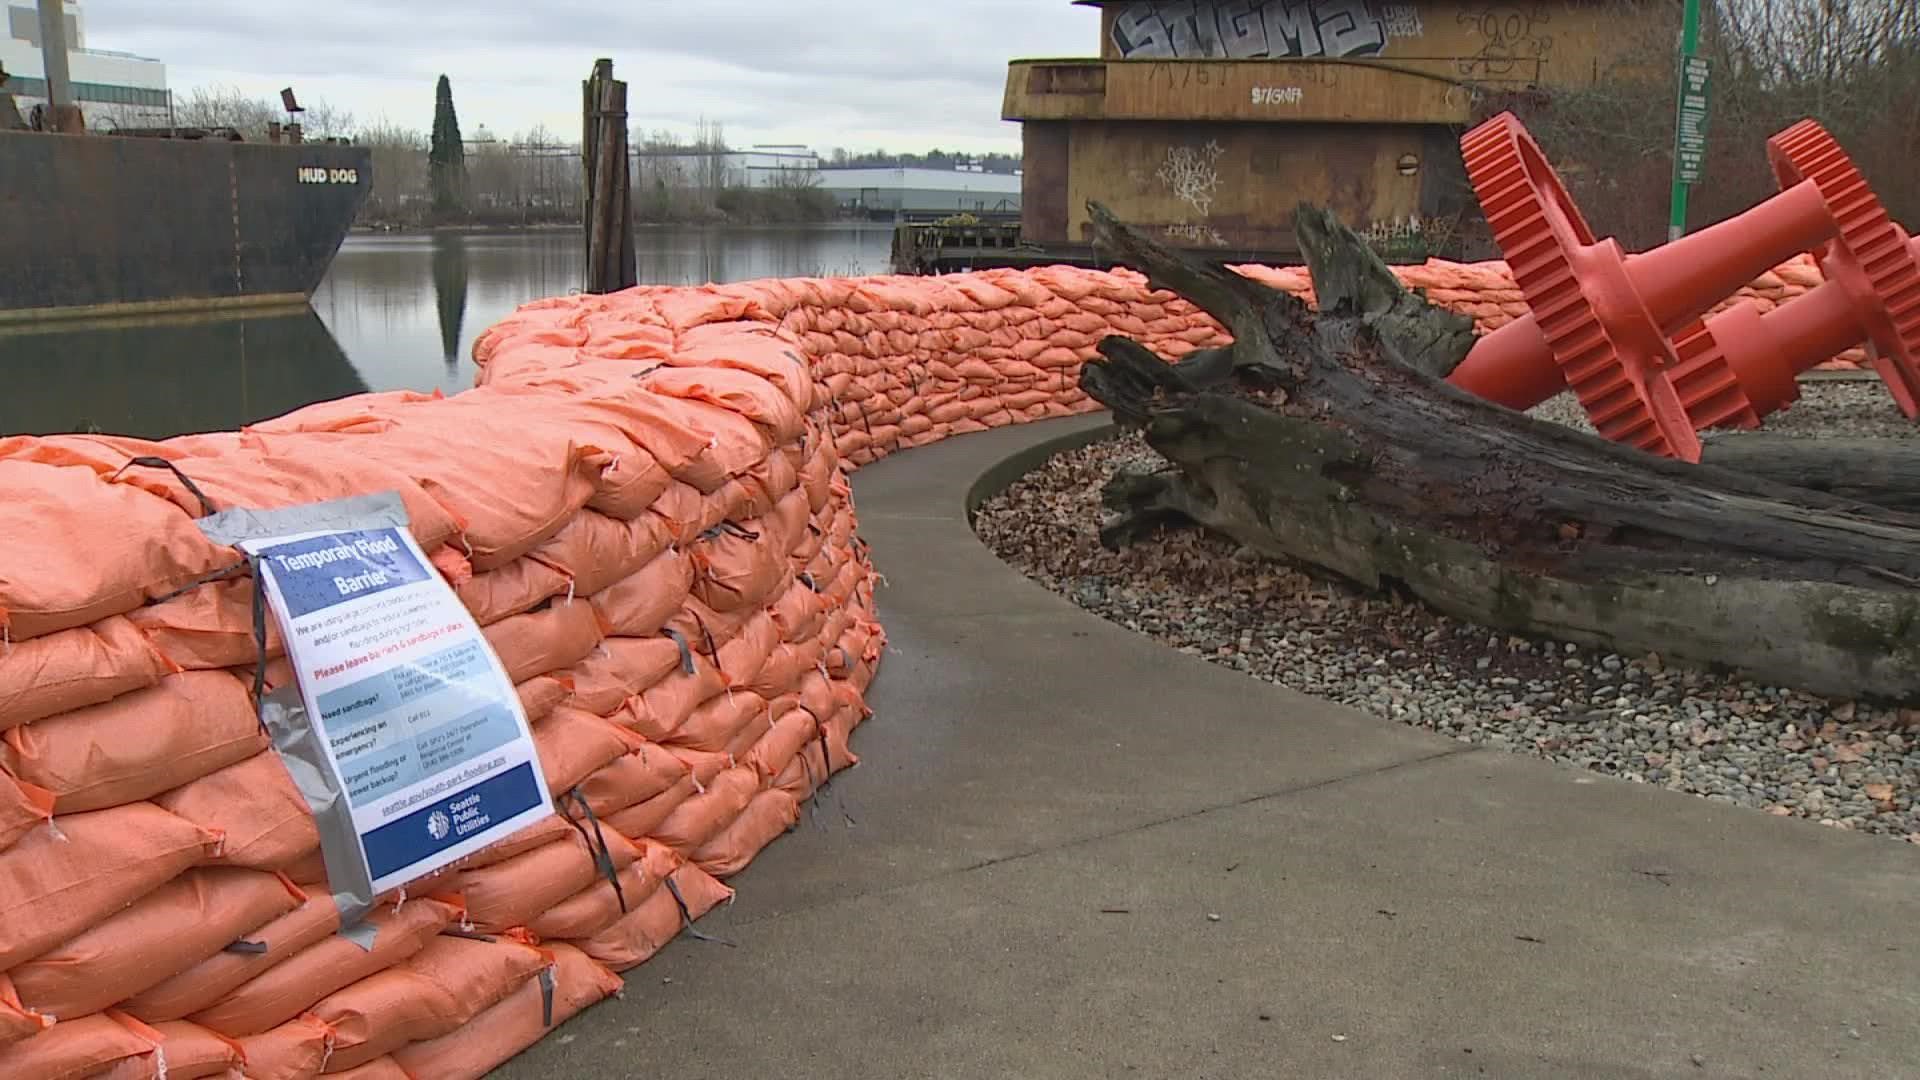 Forklifts carrying sandbags have been running nonstop, creating a barrier not just on the Duwamish but in alley’s and at people’s front doors.